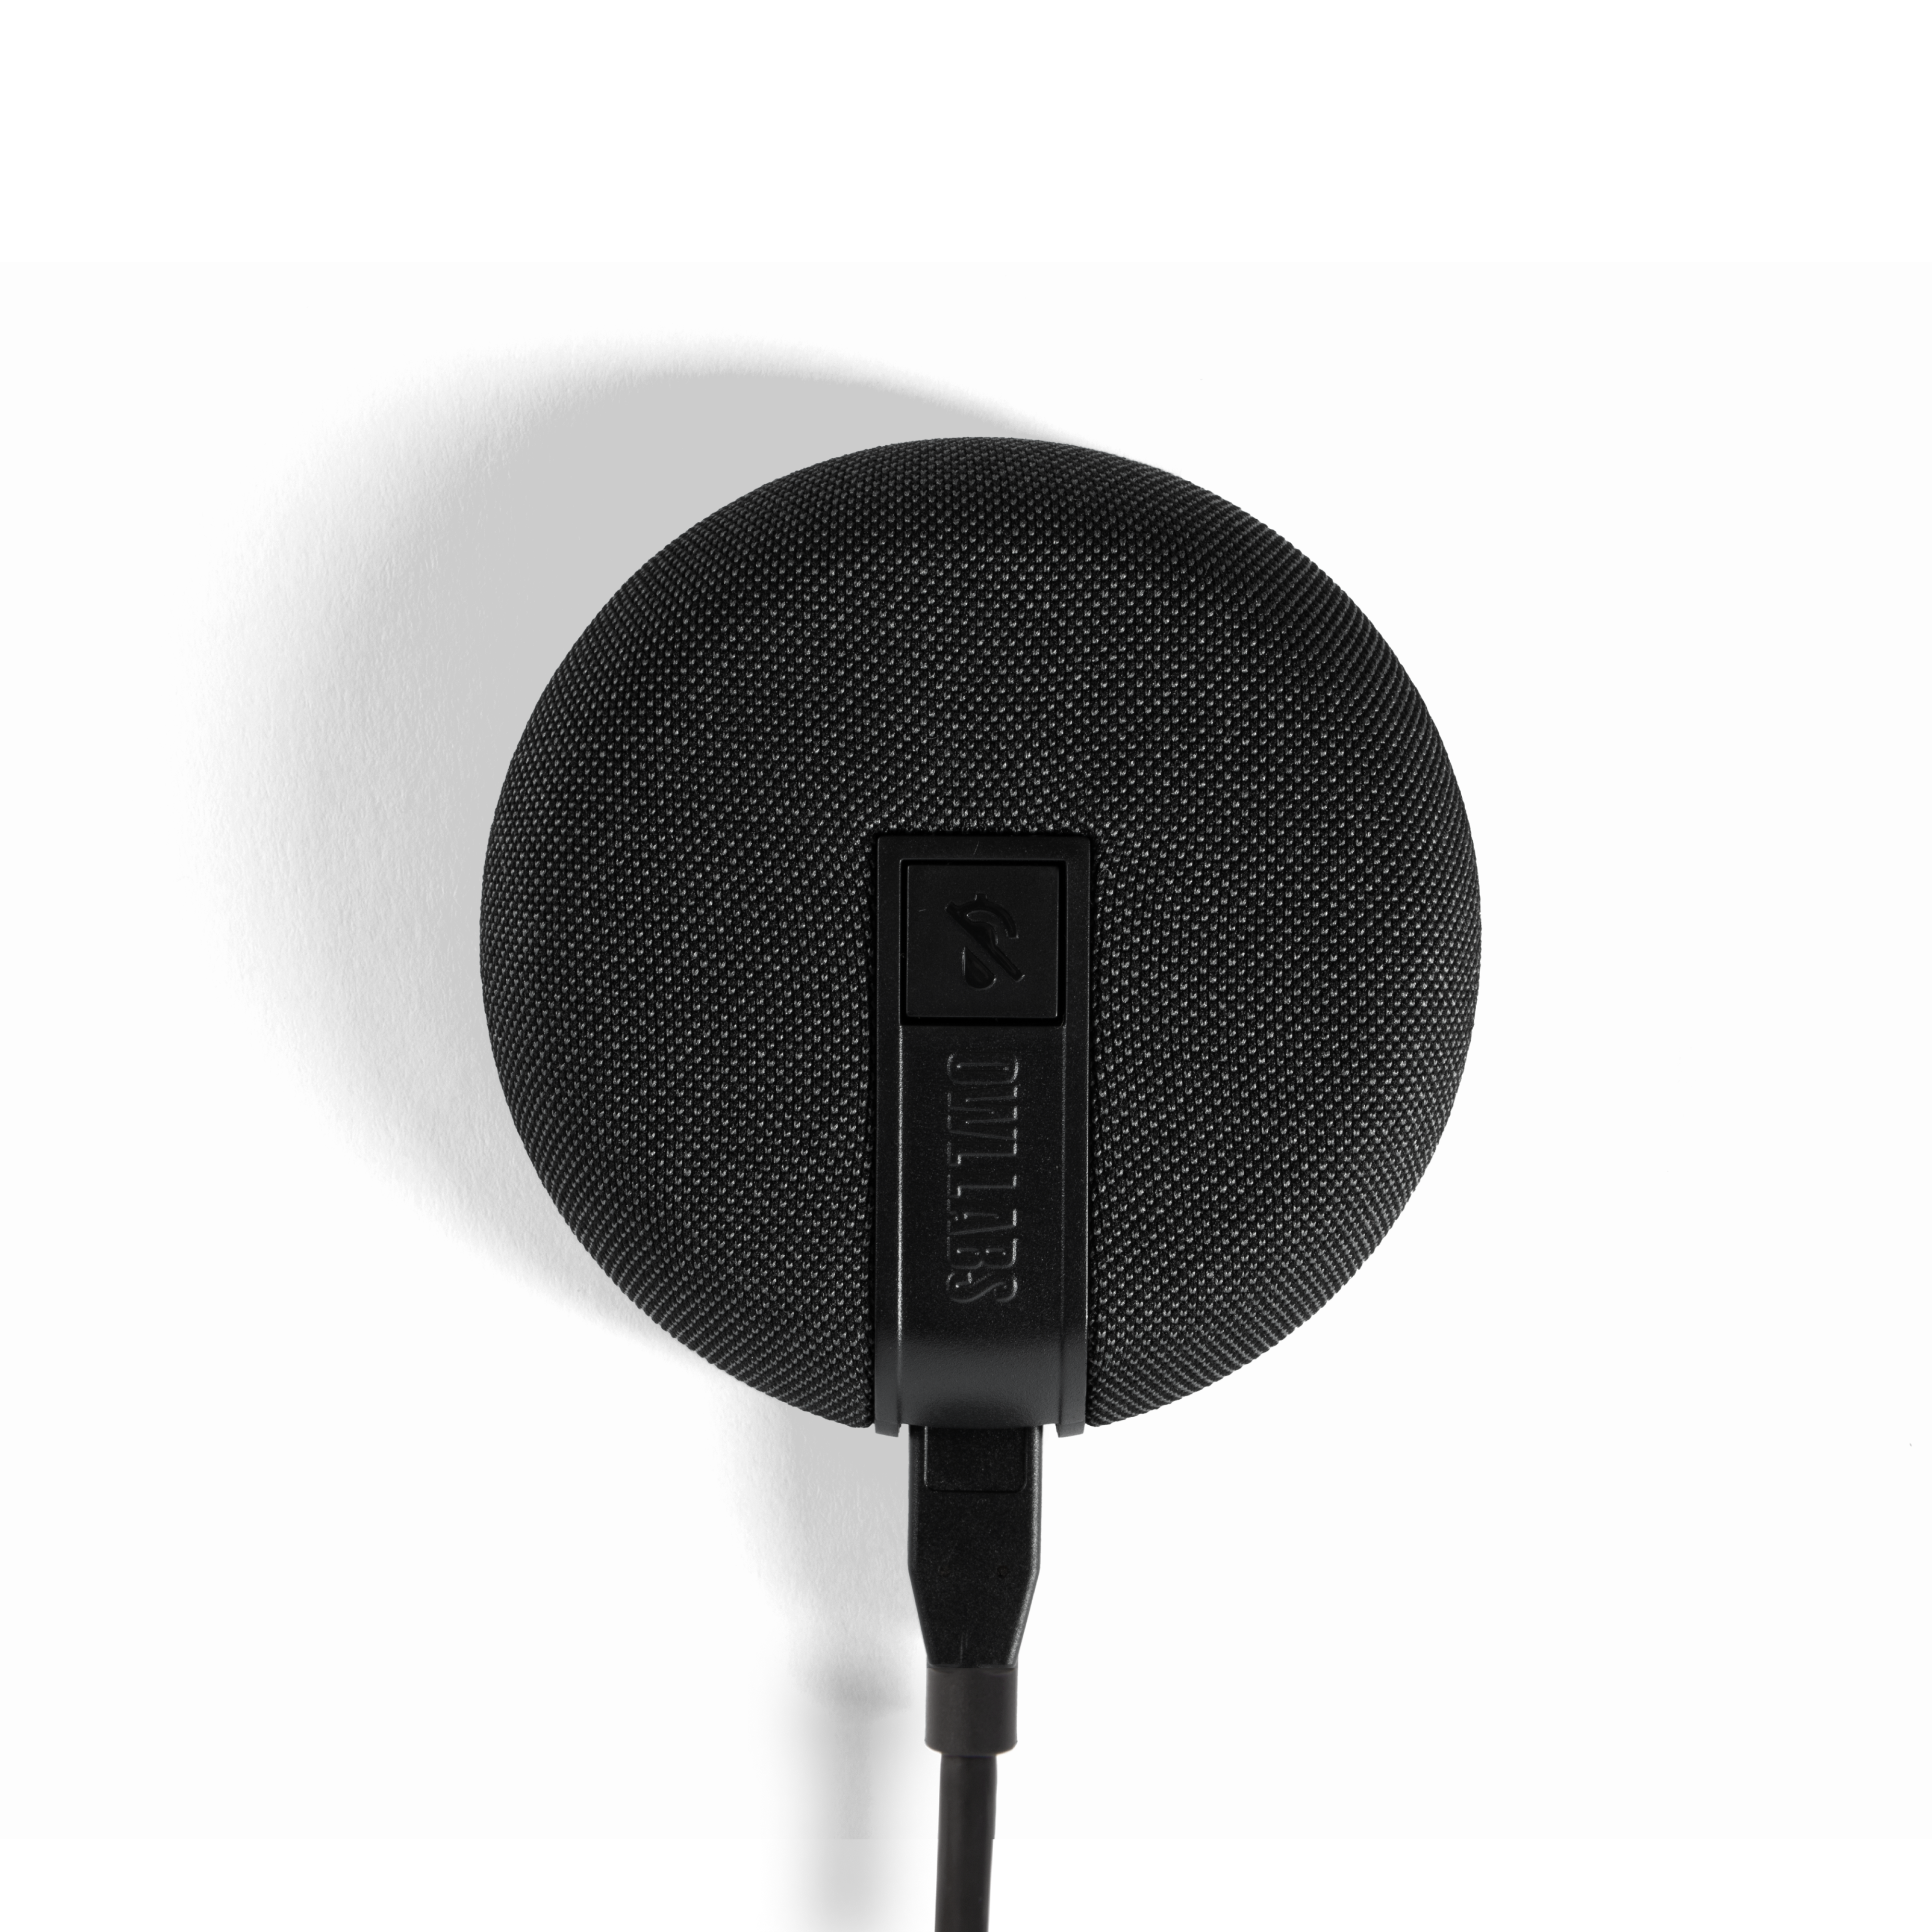 Products | Key Transparent Image | Expansion Mic - charcoal